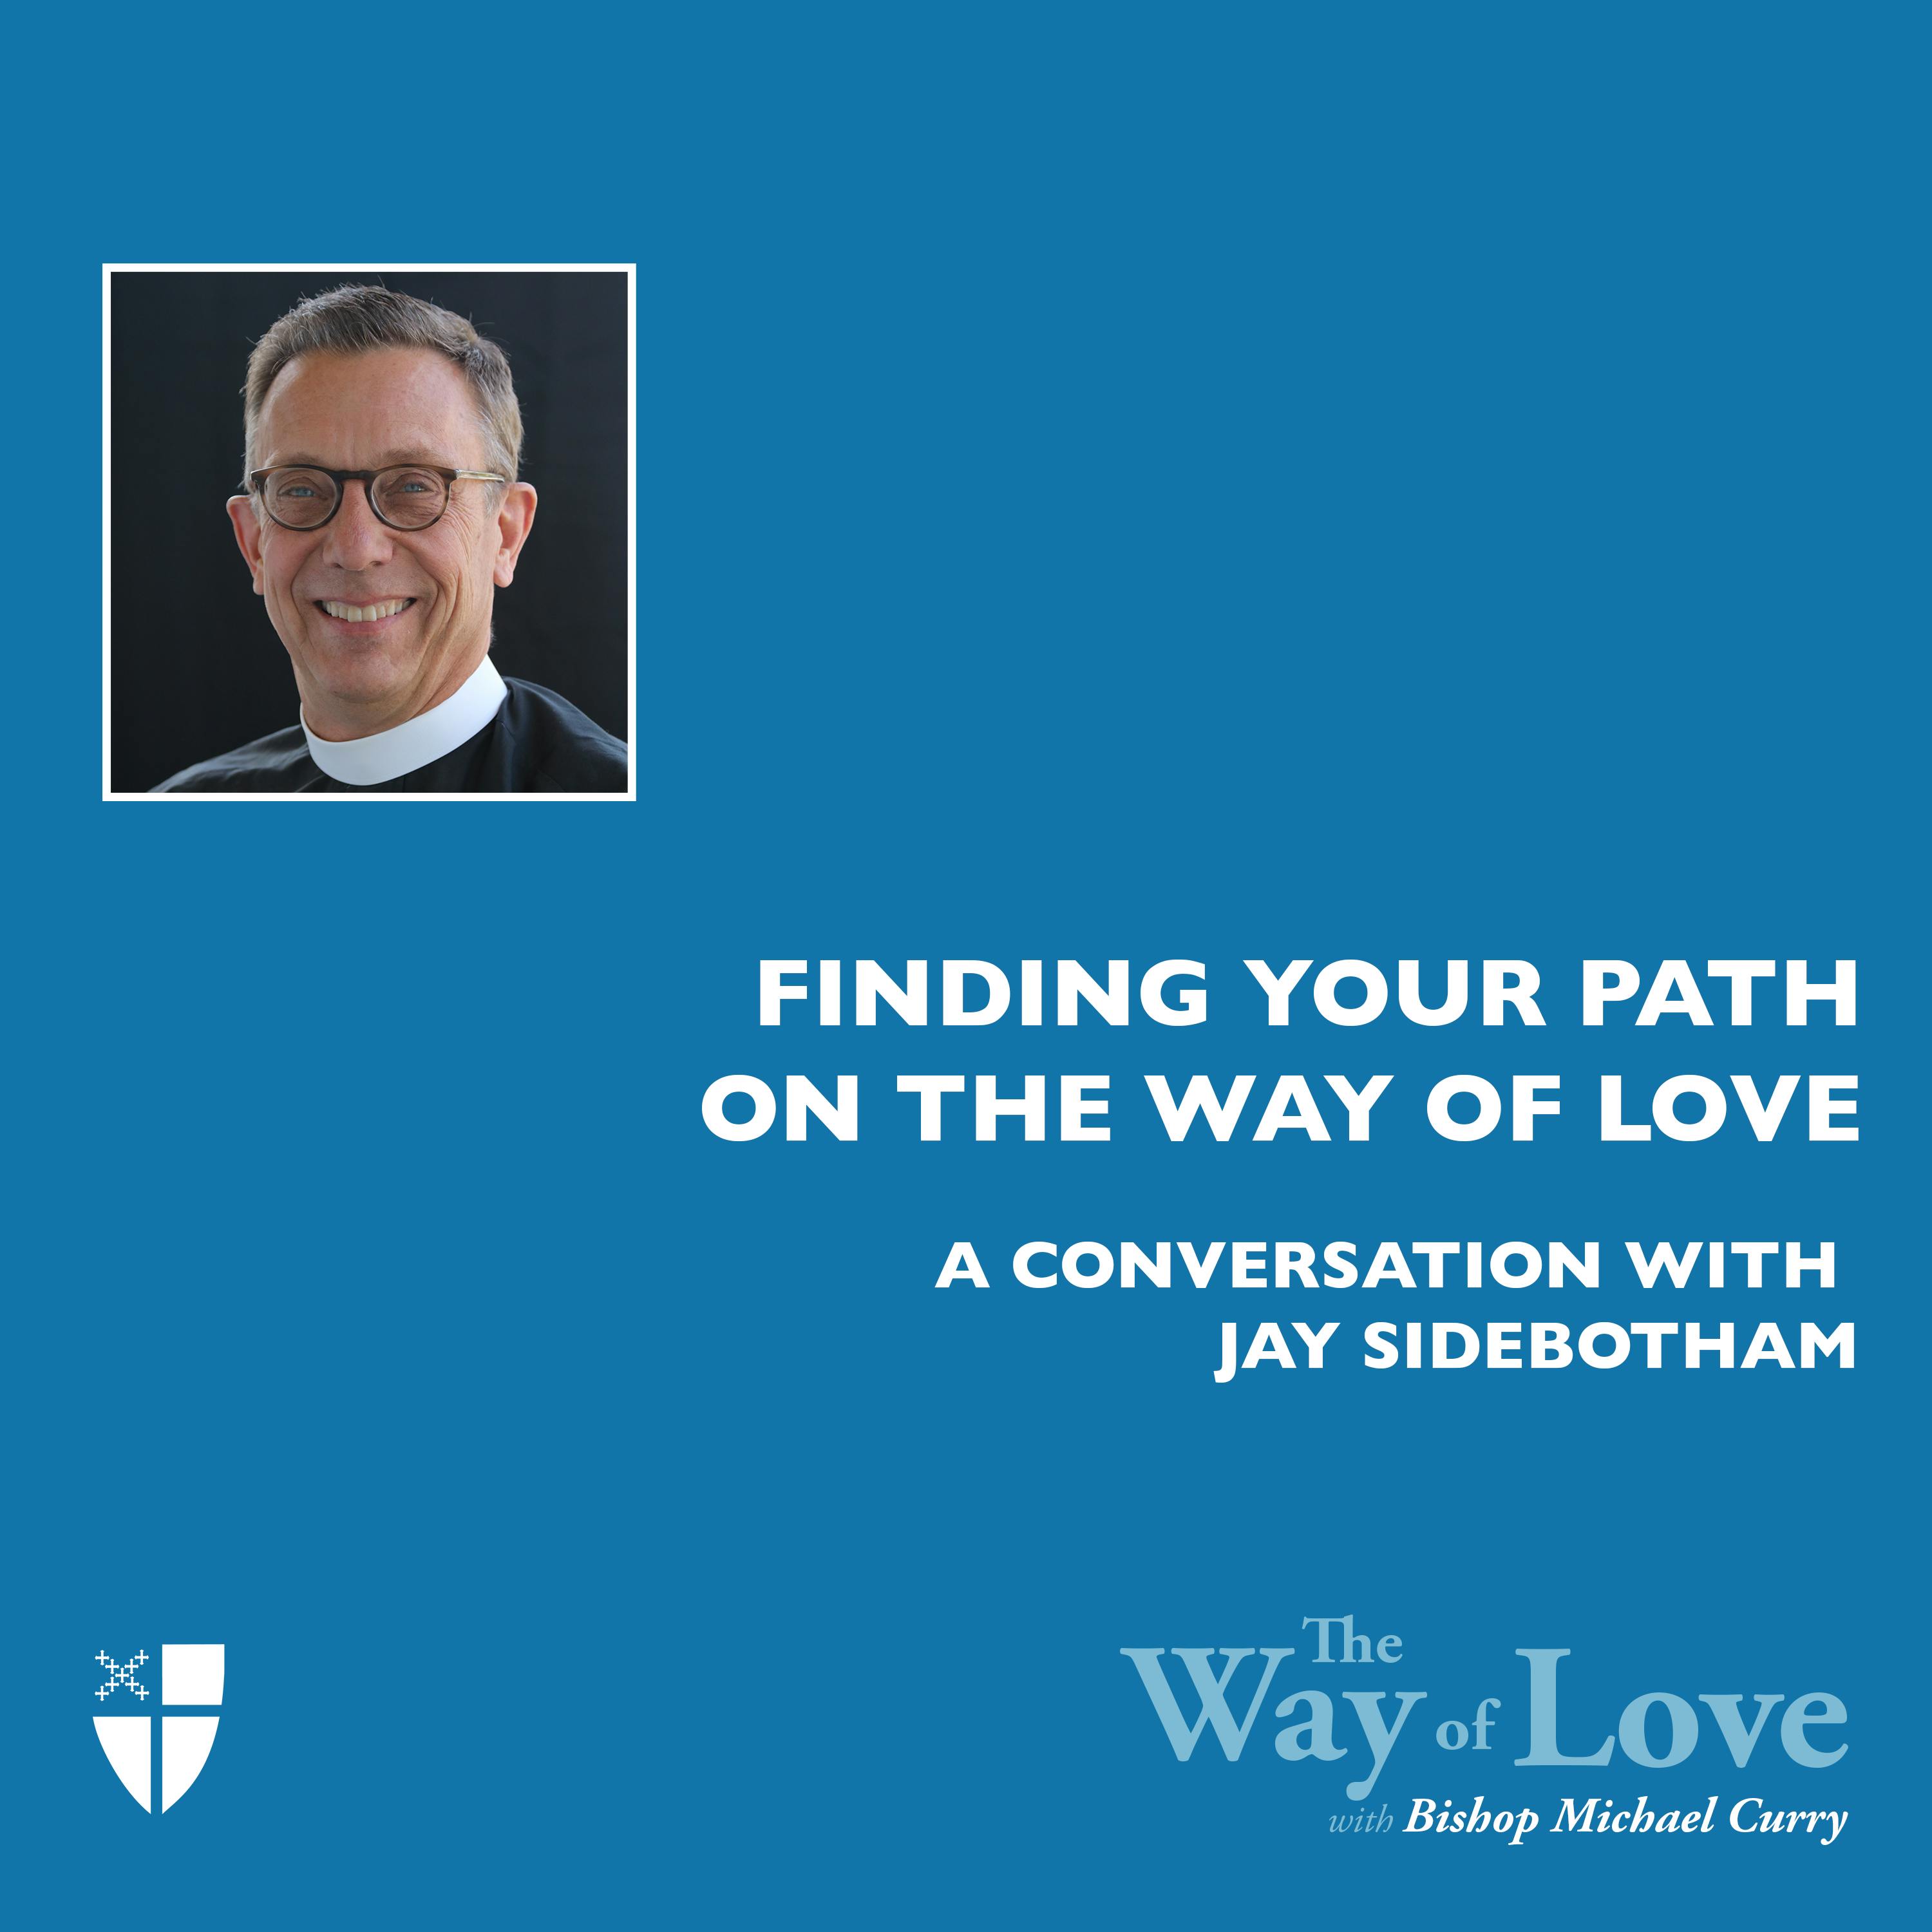 Finding Your Path on the Way of Love with Jay Sidebotham